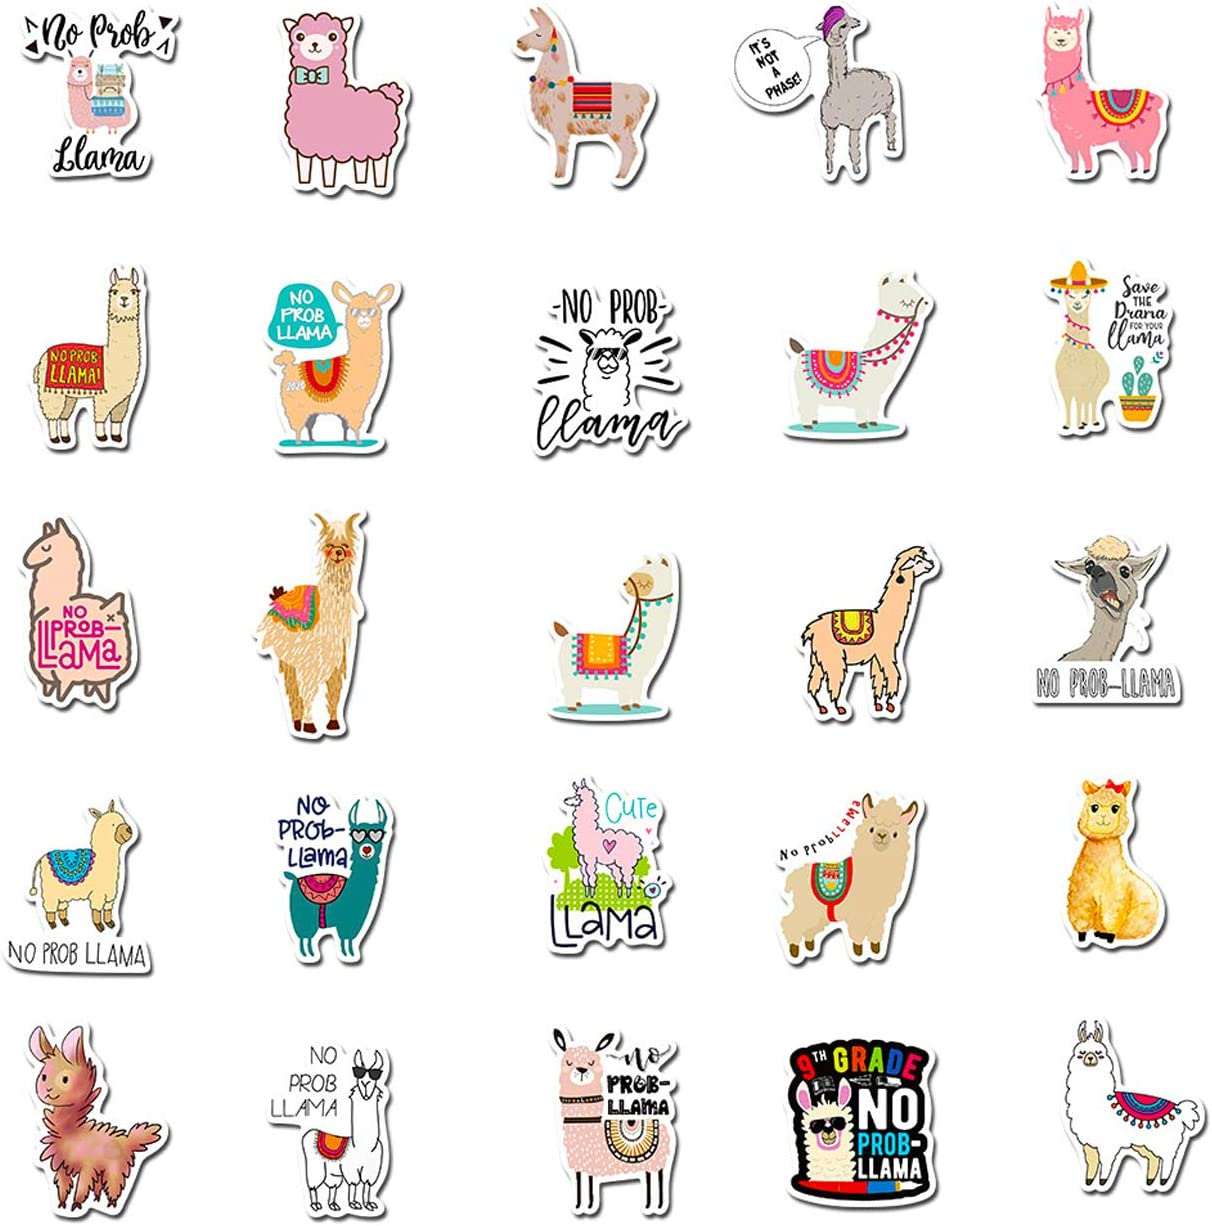 The Cute Food Stickers is a simple and interesting sticker.